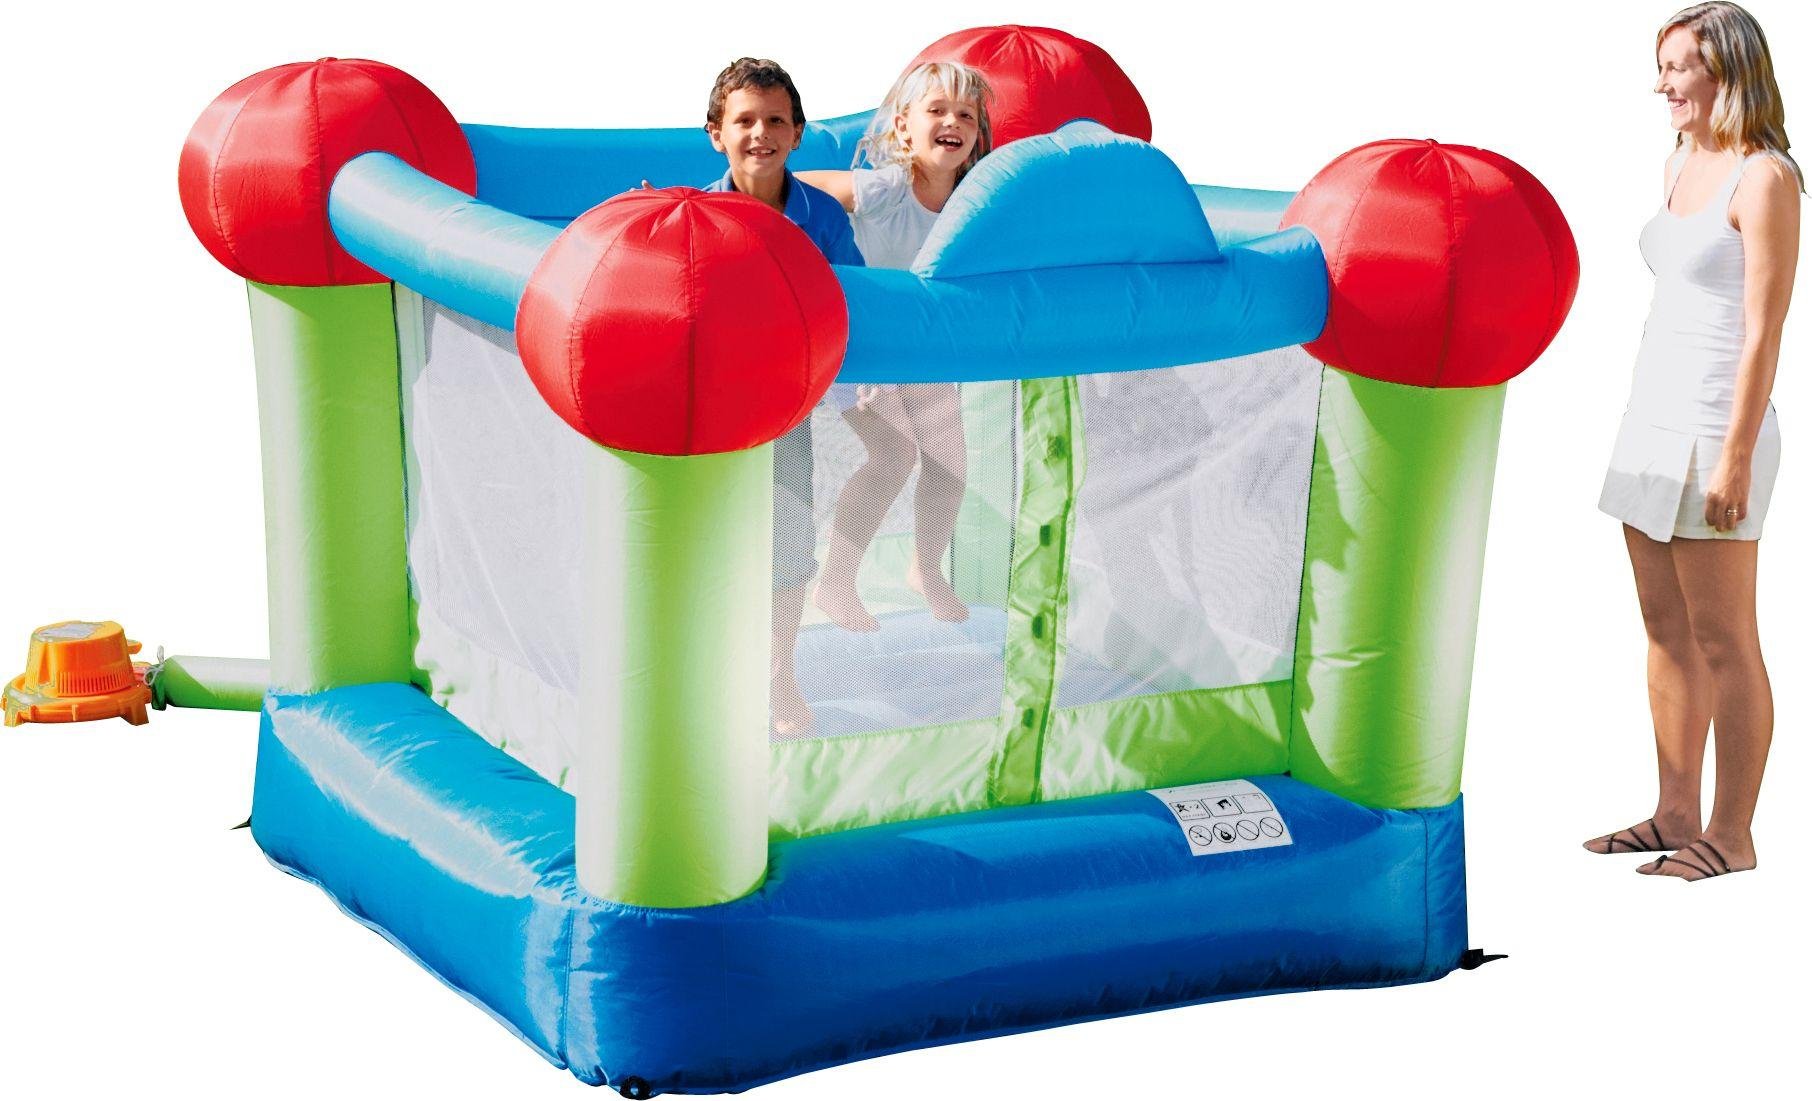 Chad Valley 6ft Bouncy Castle Review